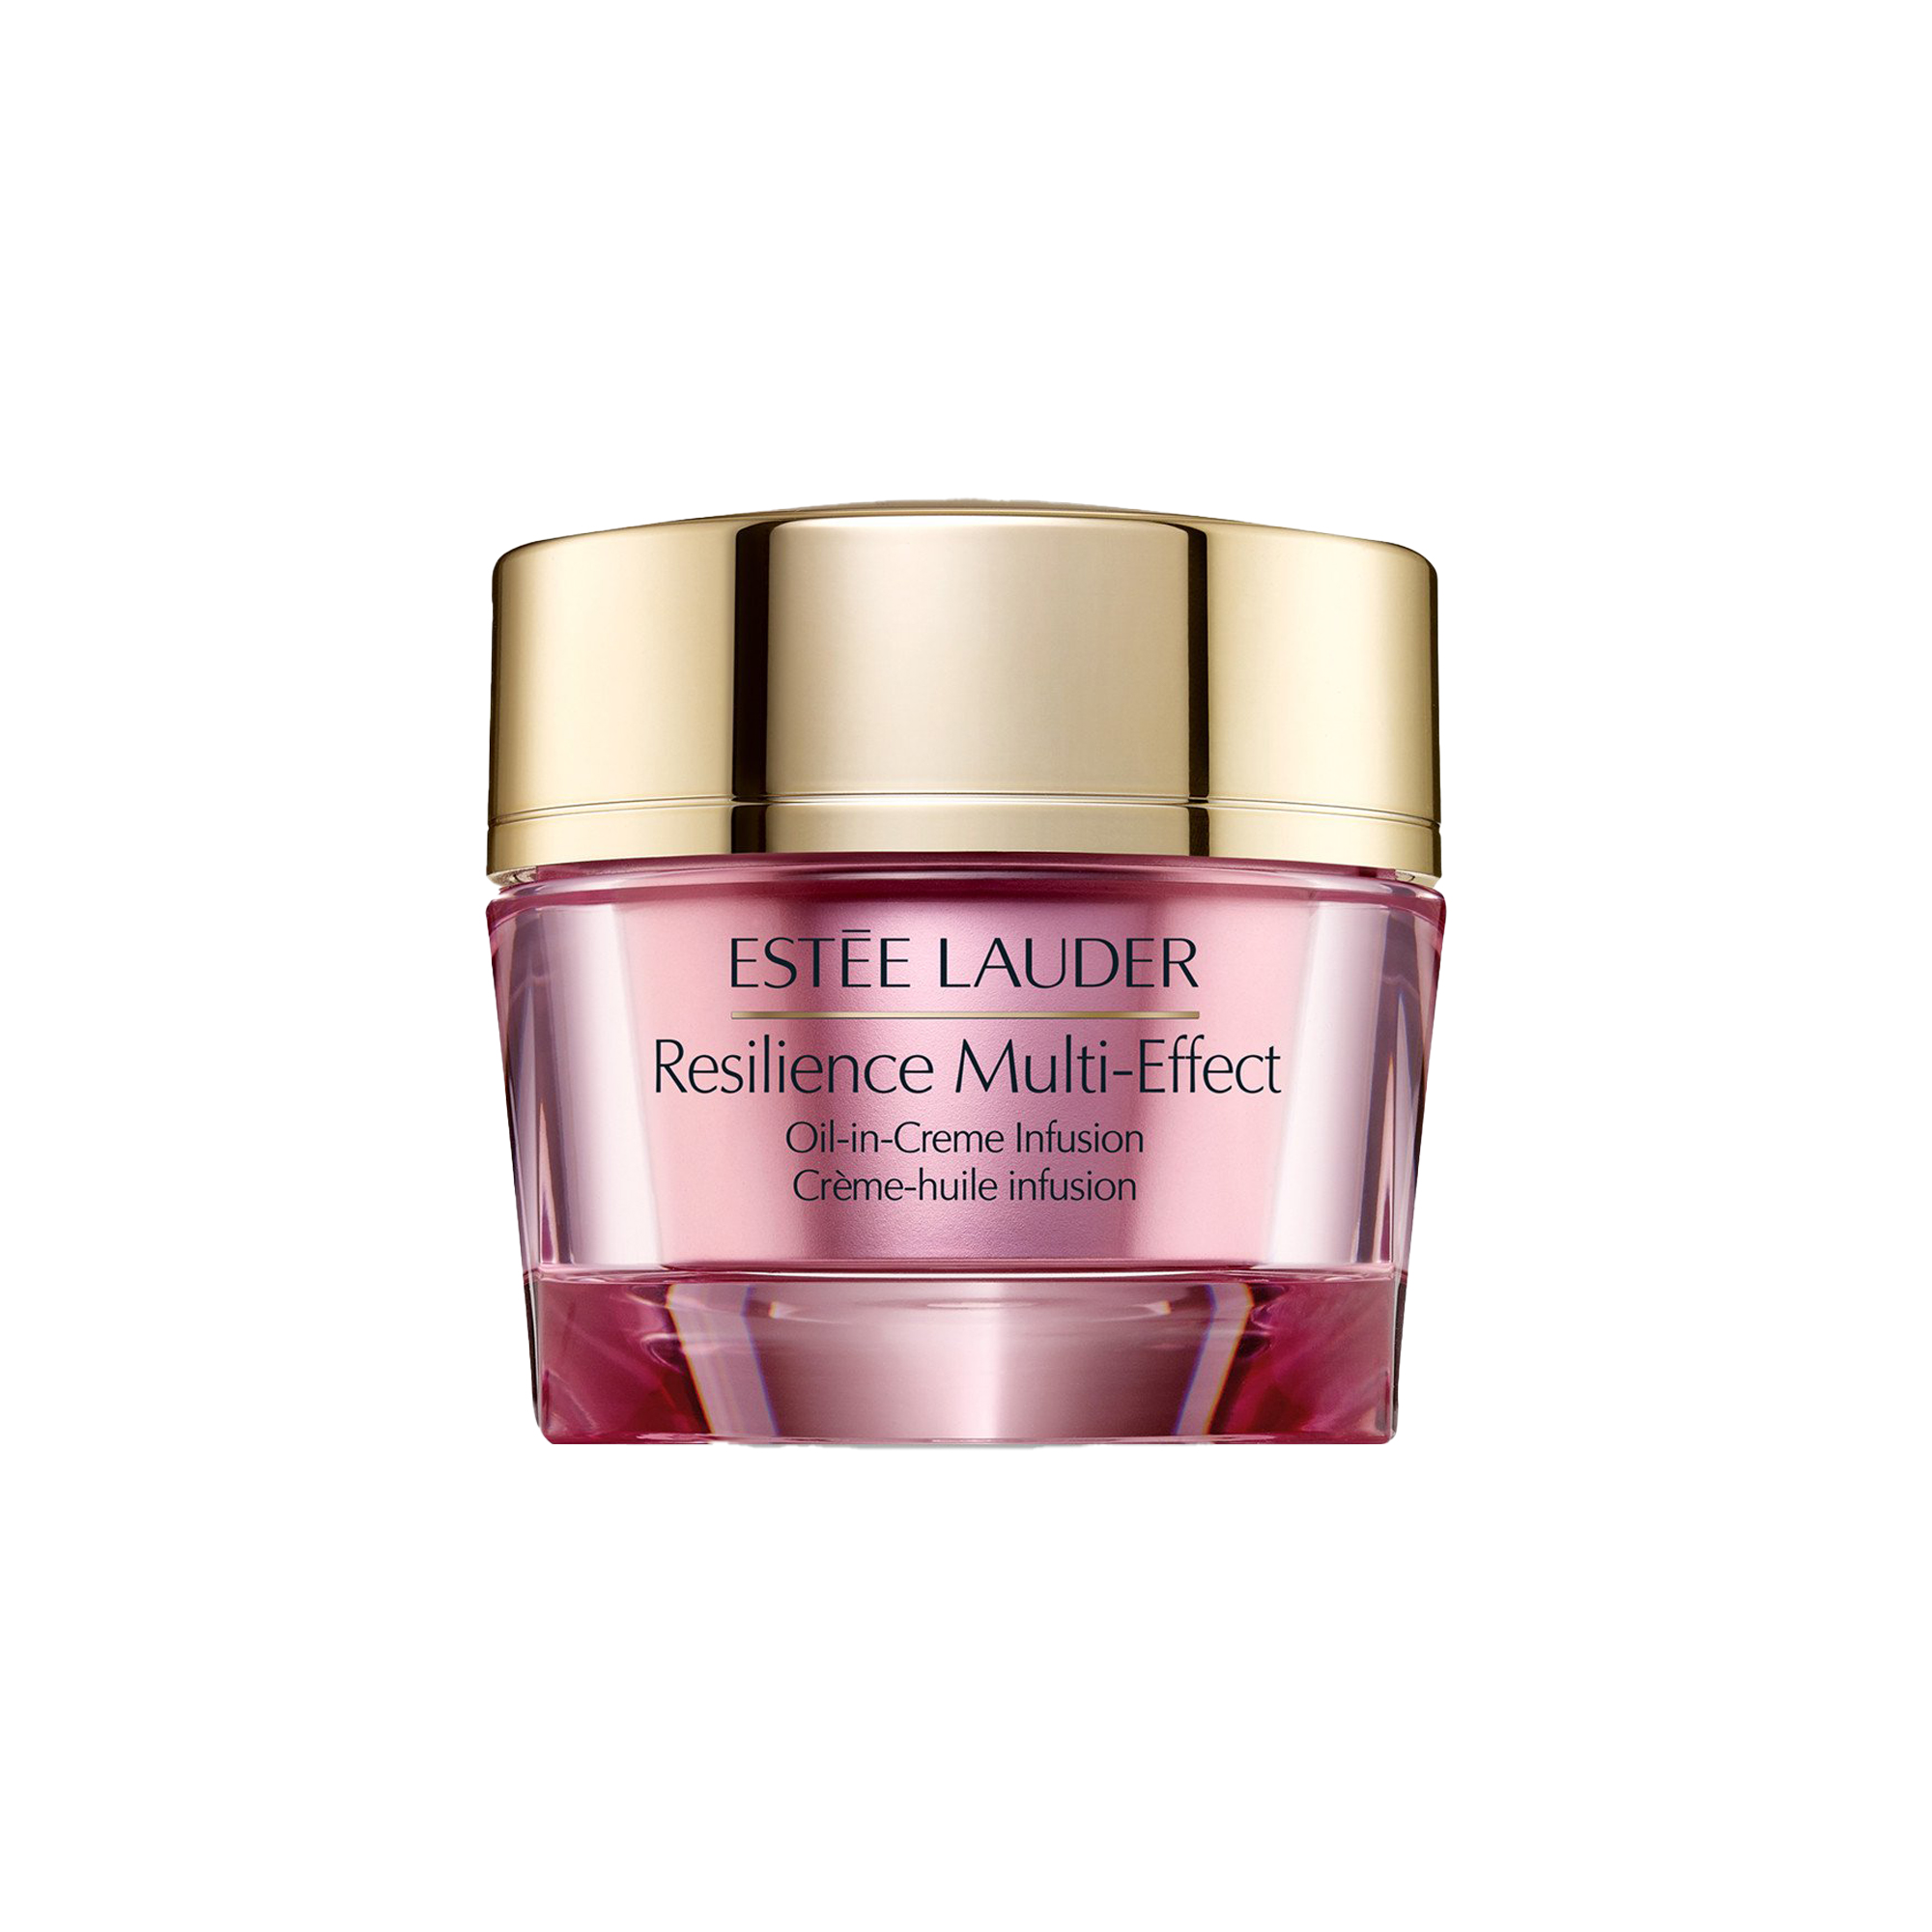  Resilience Multi-Effect Oil-in-Creme Infusion